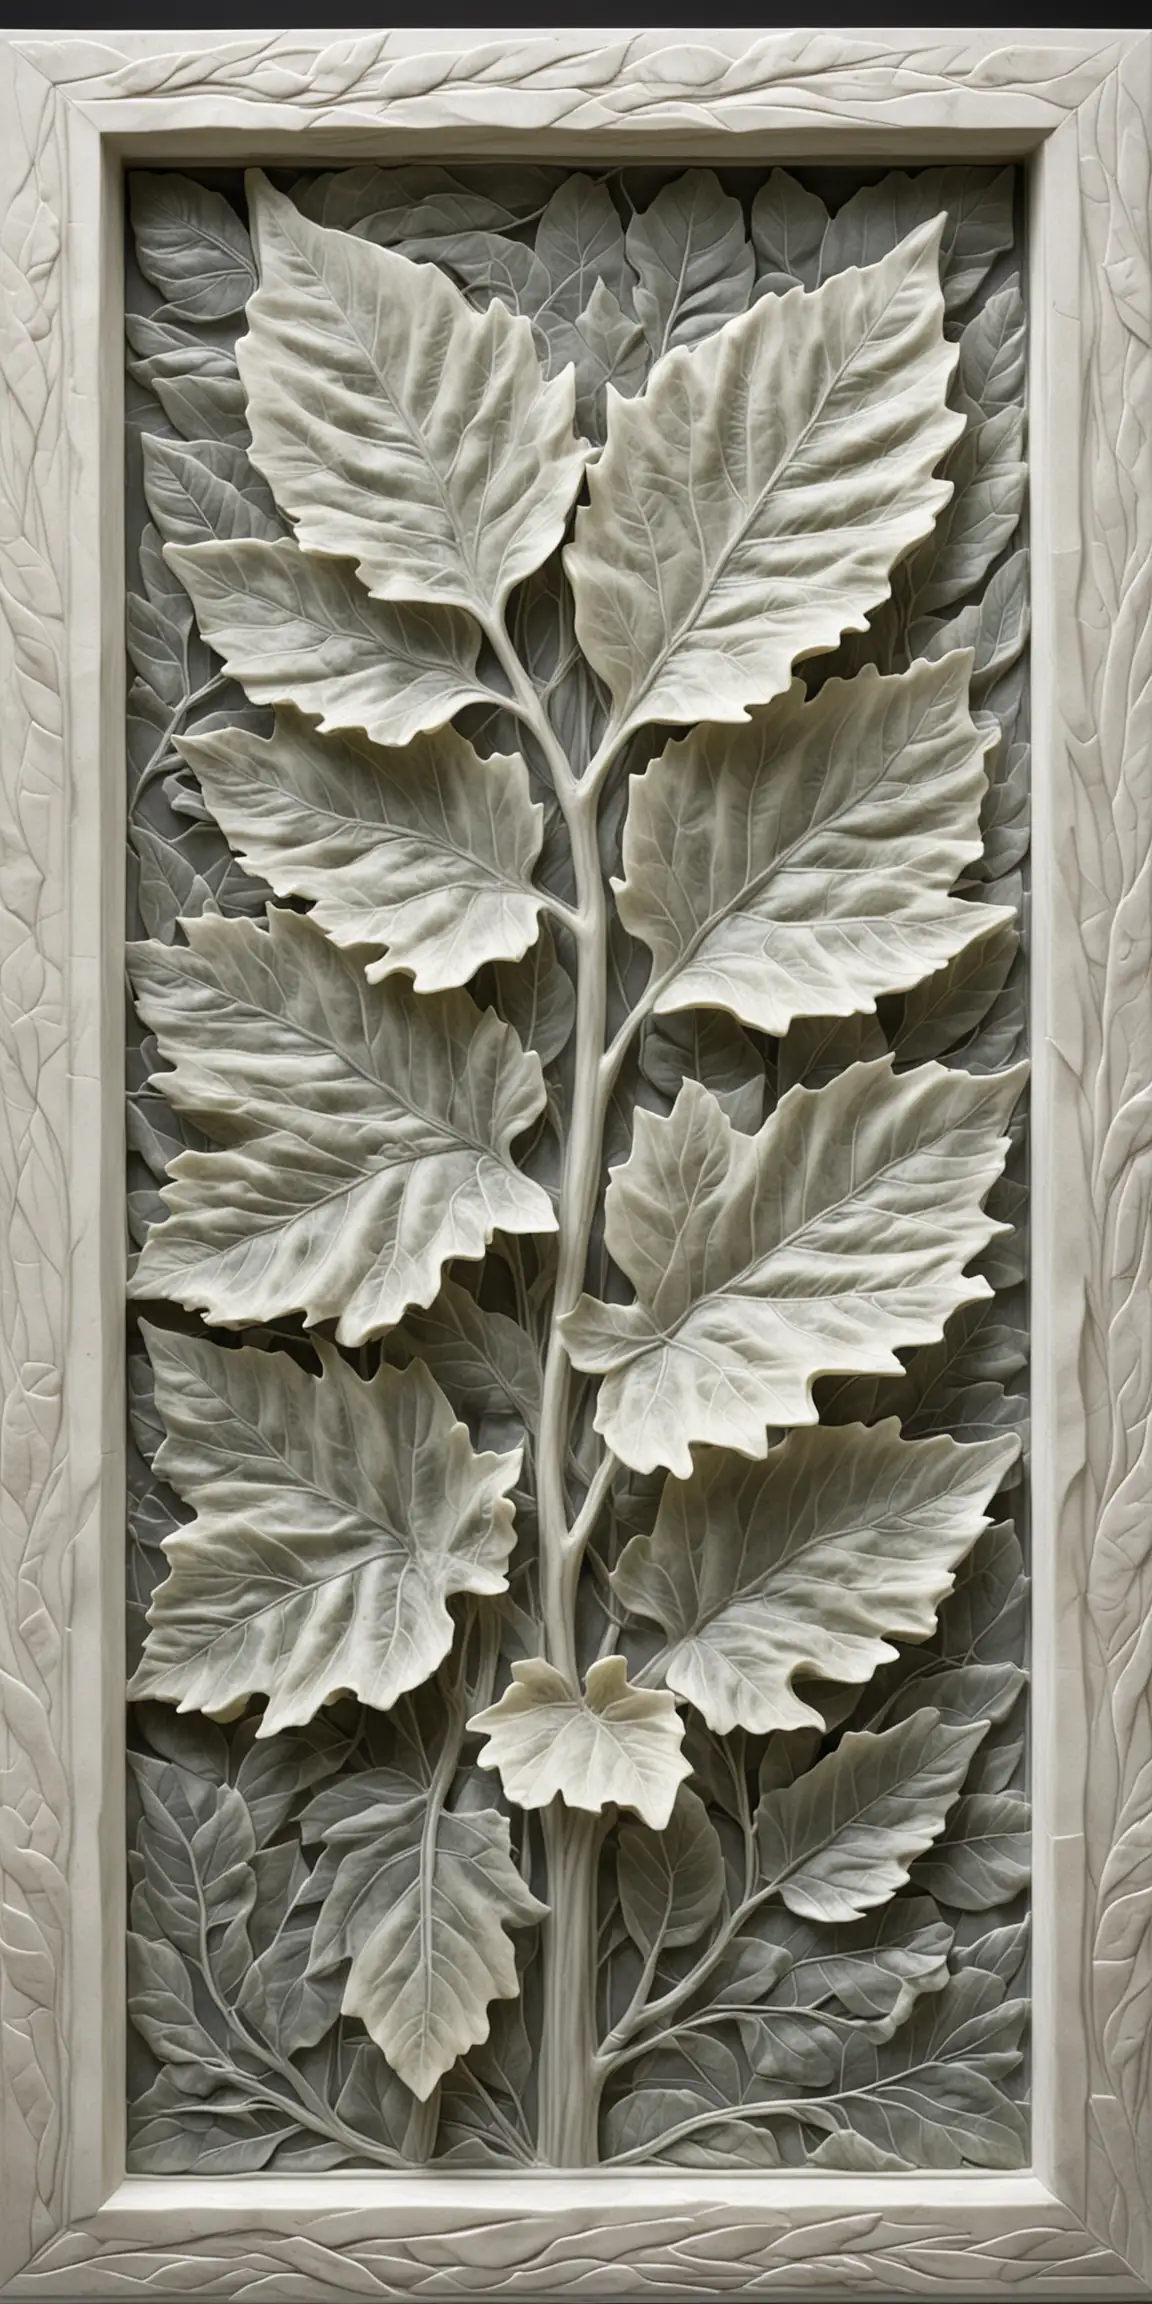 framed with 2x2 grid, narrow vines, large fig leaves, carved in translucent alabaster, 3d relief, inverted gray scale